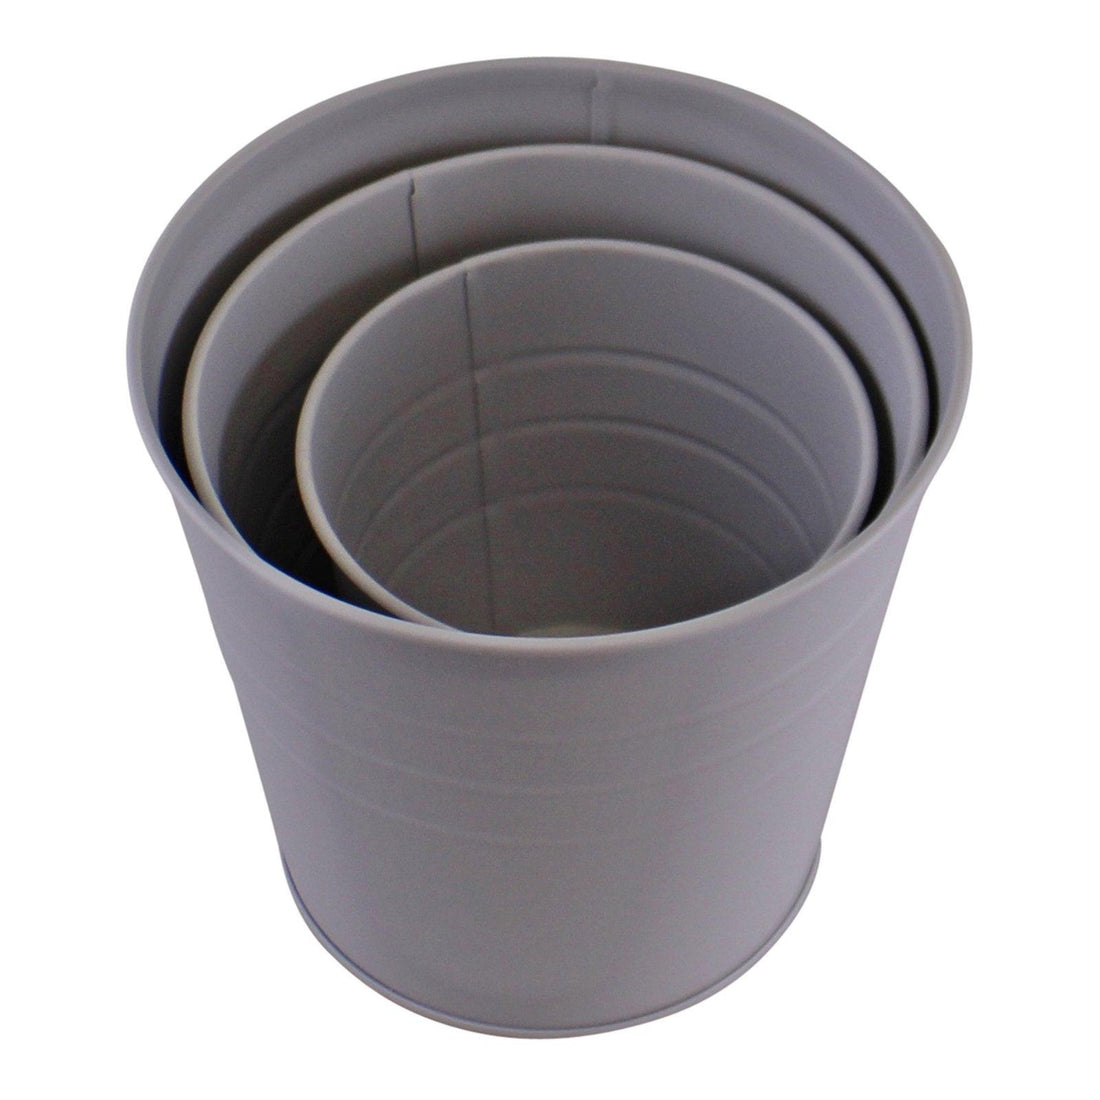 Set of 3 Round Metal Planters, Grey - £20.99 - Potting Shed Accessories 